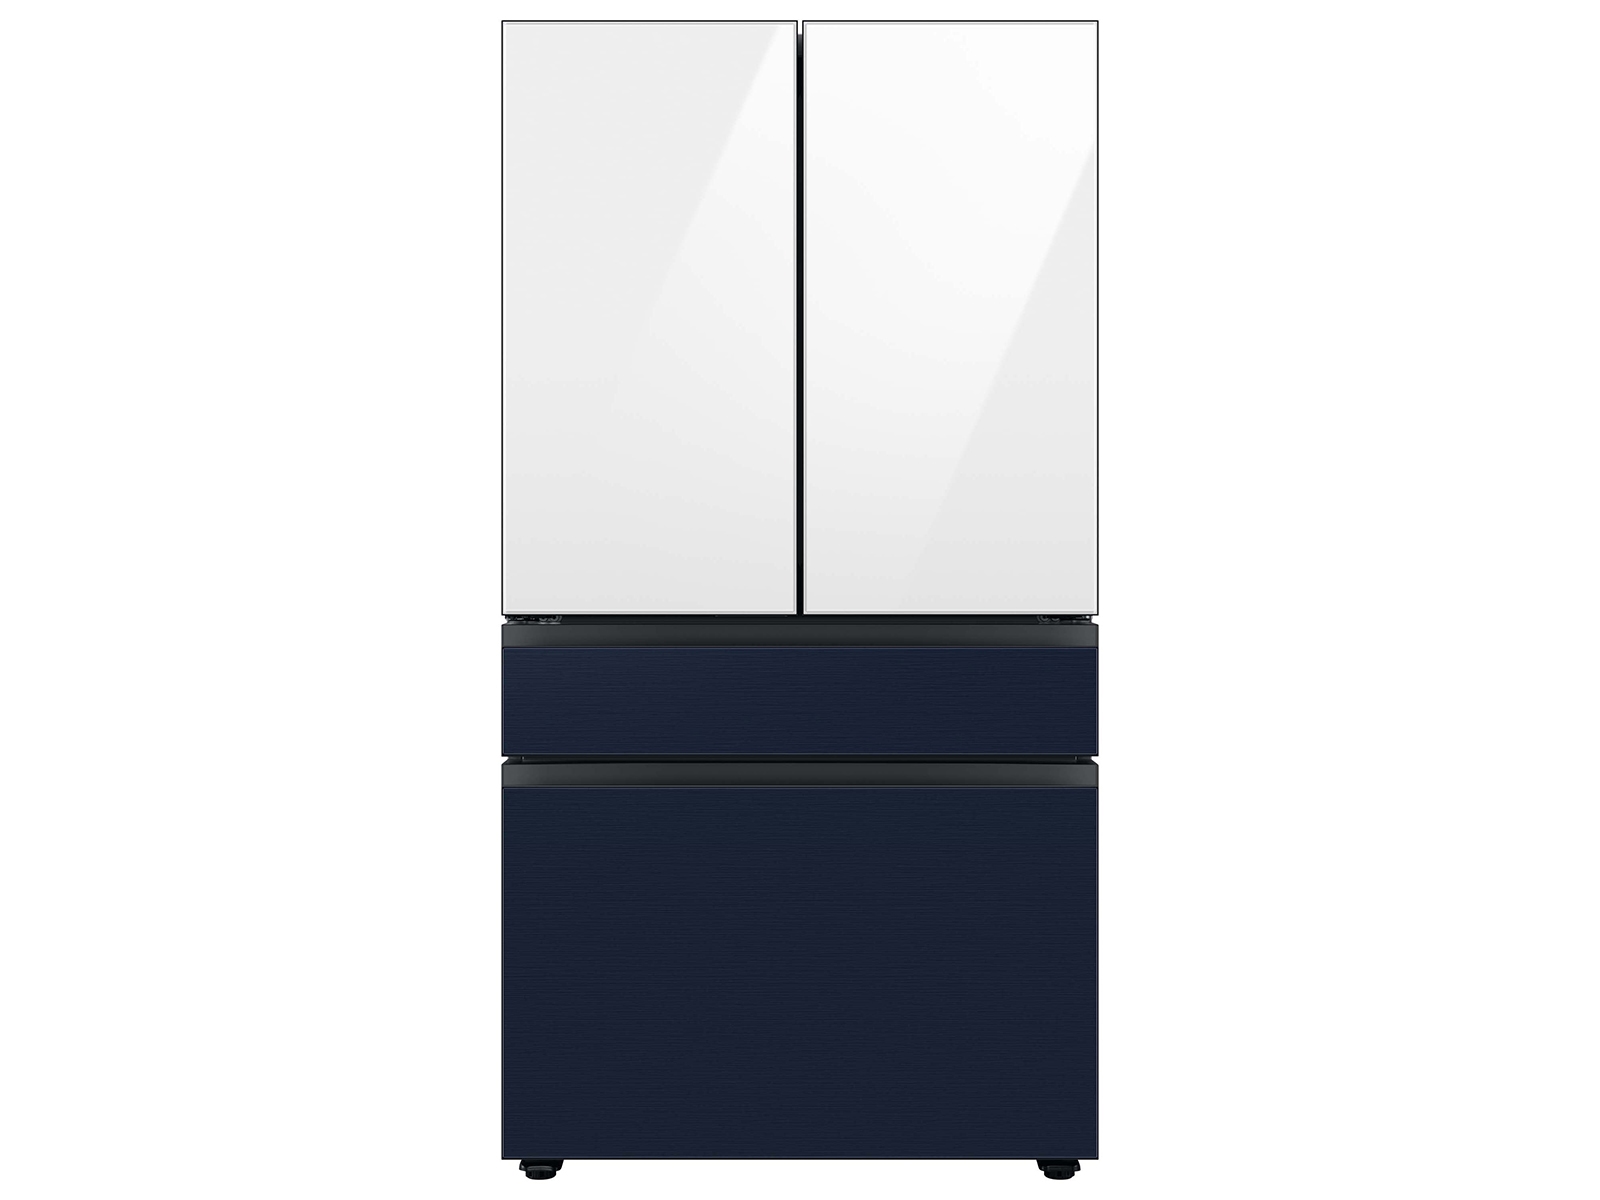 Bespoke 4-Door French Door Refrigerator (29 cu. ft.) with Customizable Door Panel Colors and Beverage Center™ in White Glass Top Panels with Navy Steel Middle and Bottom Panel